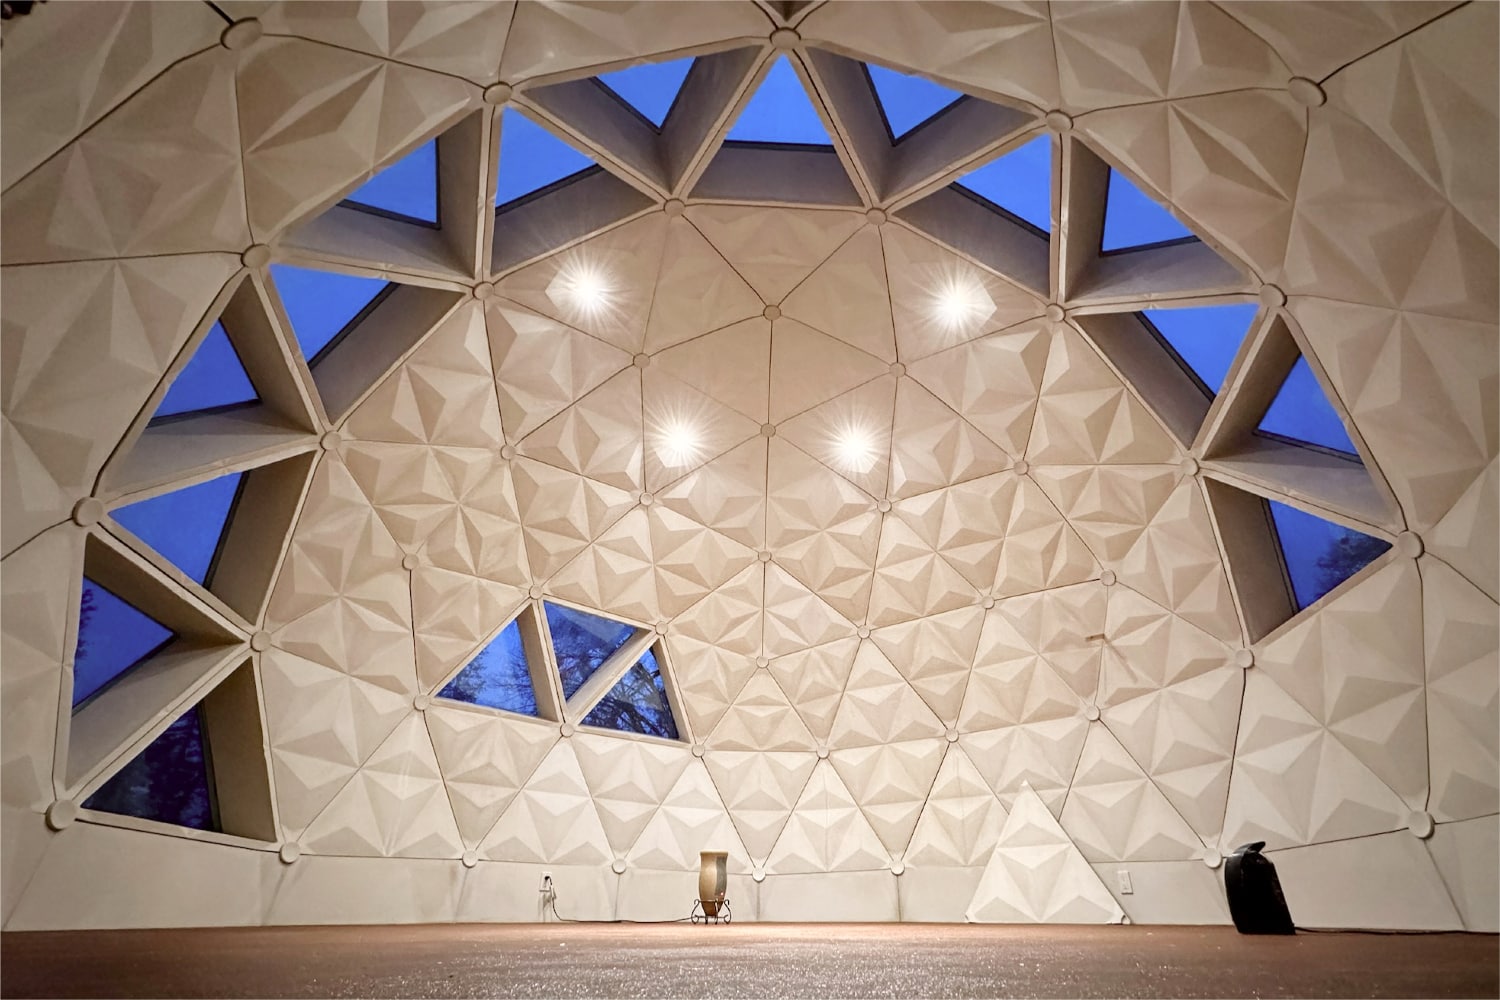 What are Geodesic domes?